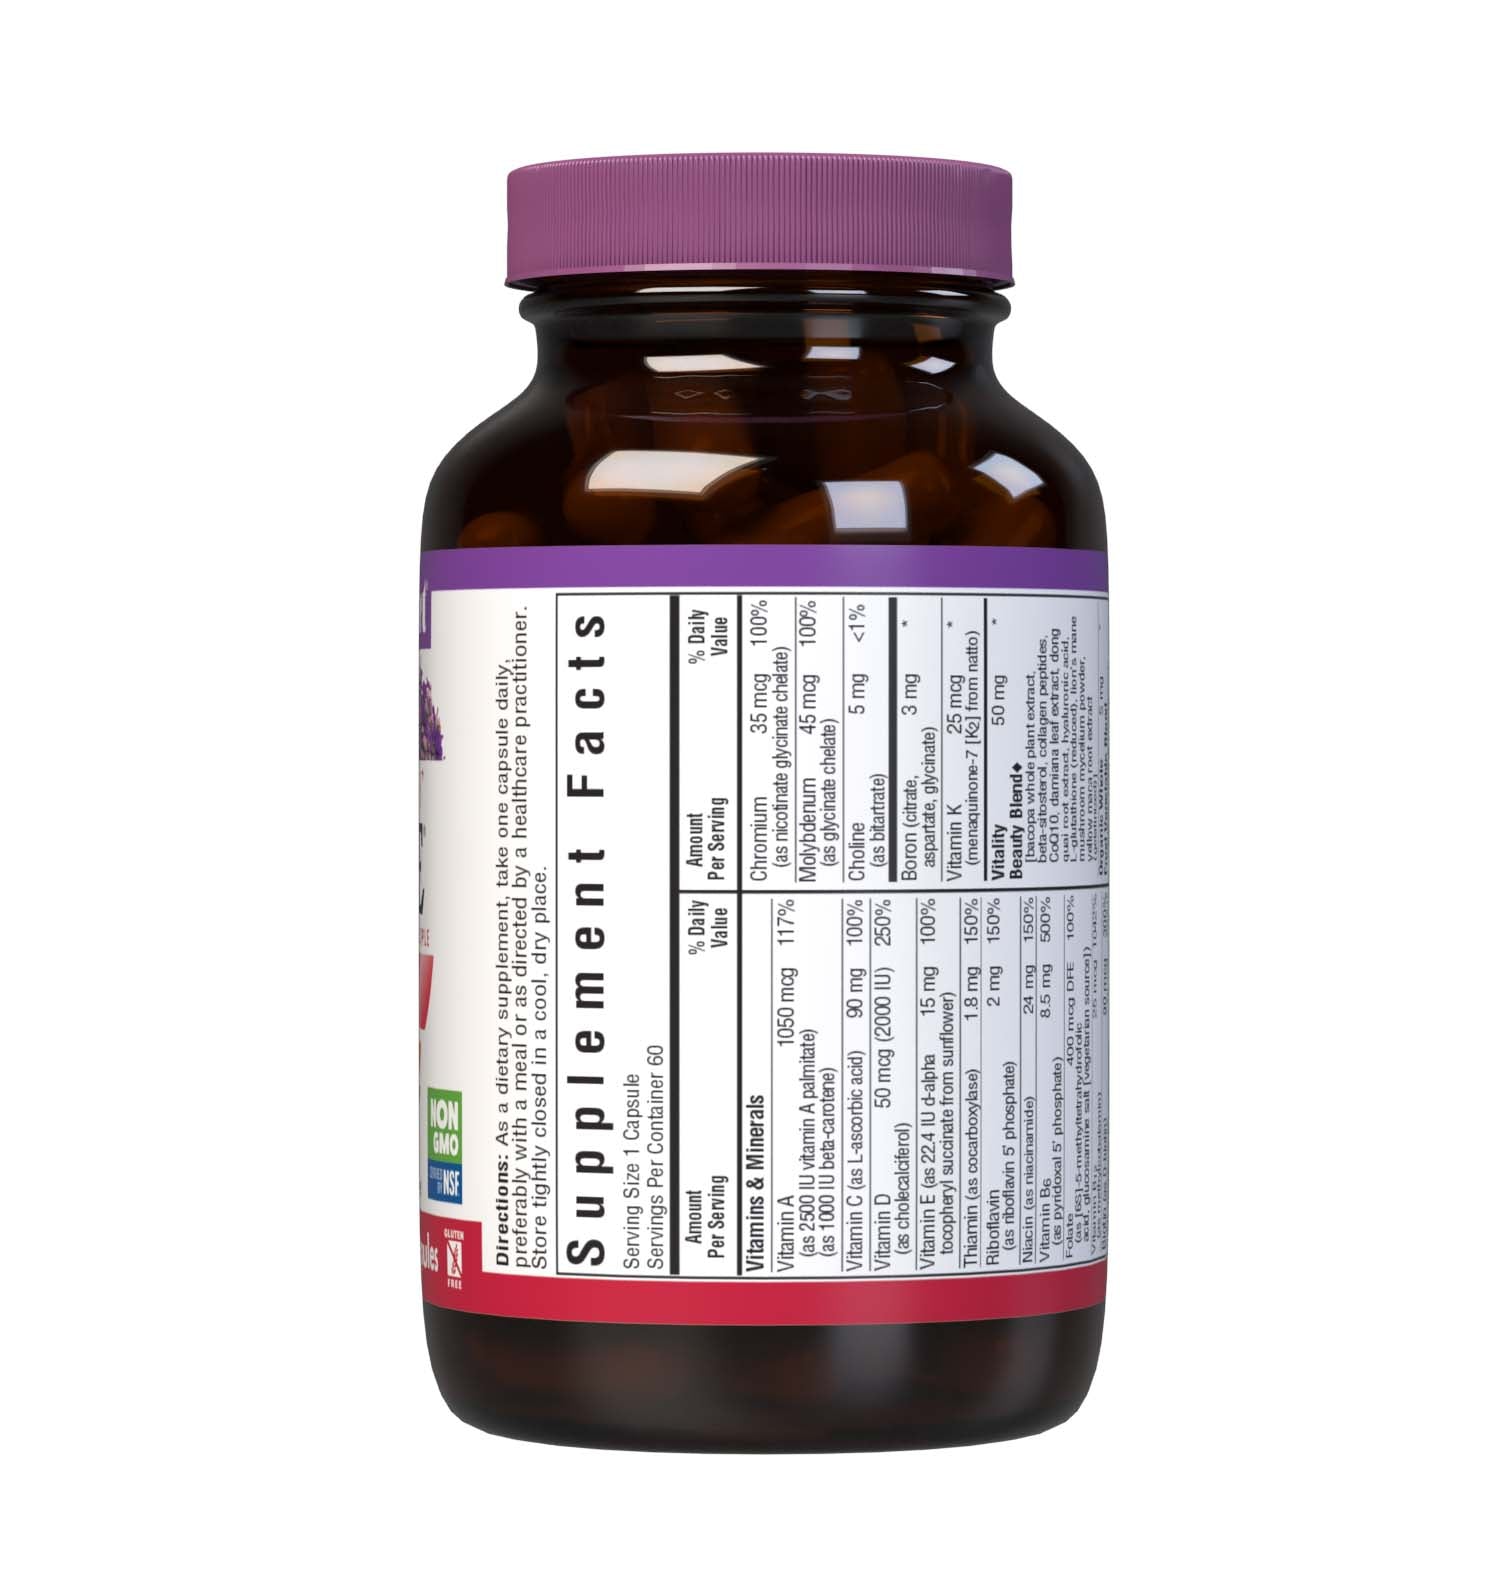 Bluebonnet’s Ladies’ ONE 40+ Whole Food-Based Multiple 60 Vegetable Capsules are formulated for daily nutritional support and vitality for women over 40. Helps to increase energy and vitality, protect beautiful skin, enhance mood, and support heart health. Supplement facts panel. #size_60 count